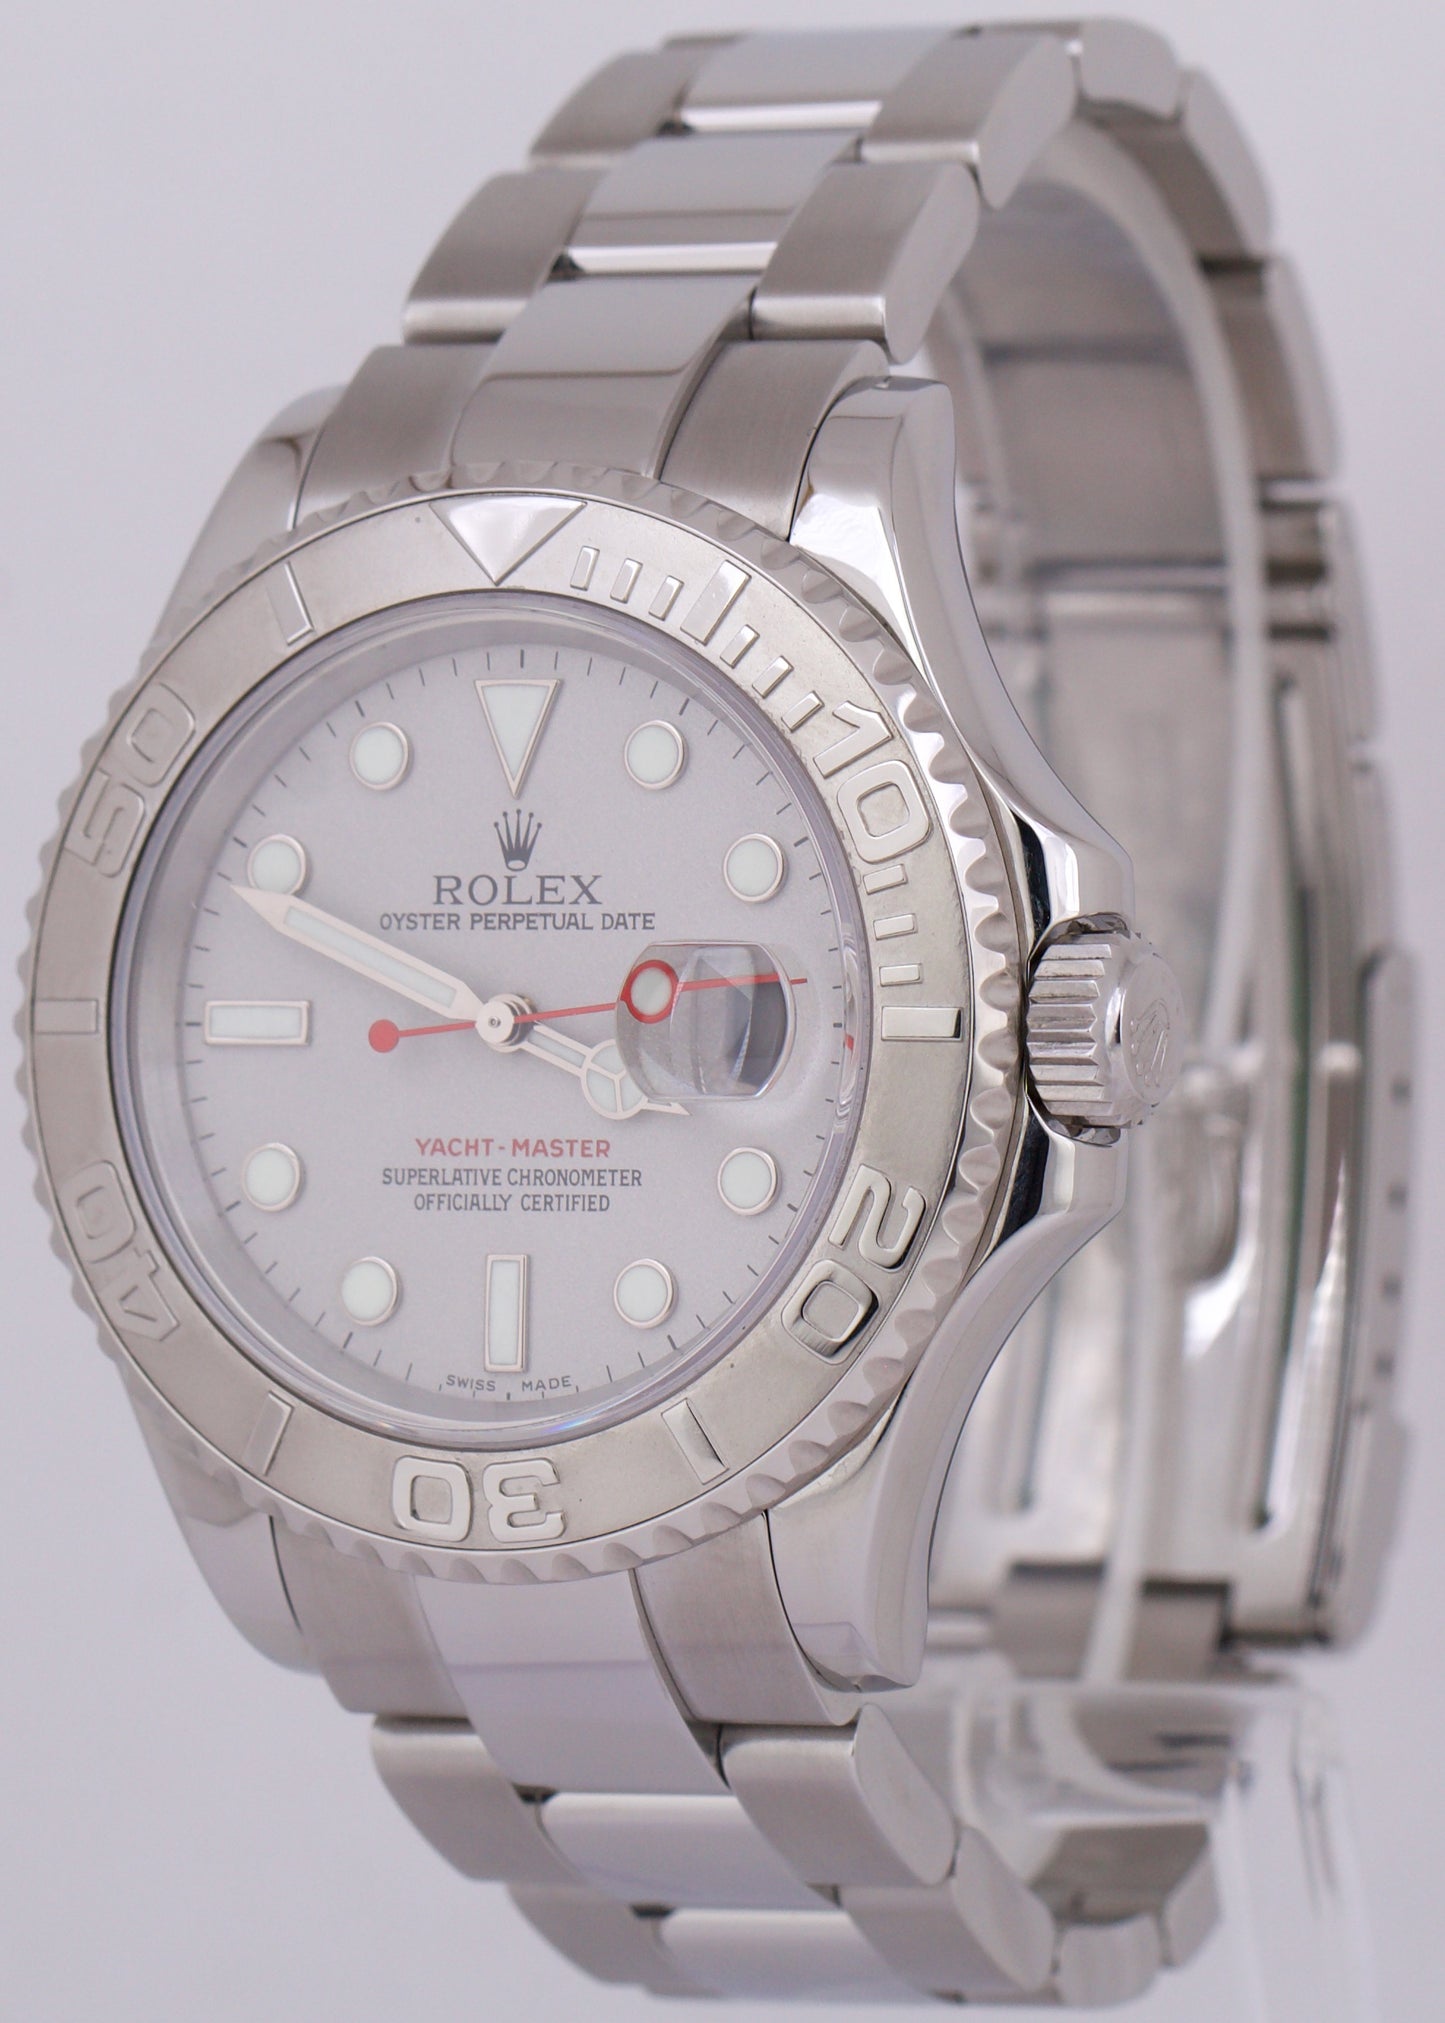 MINT PAPERS Rolex Yacht-Master Stainless Steel PLATINUM 40mm Watch 16622 BOX